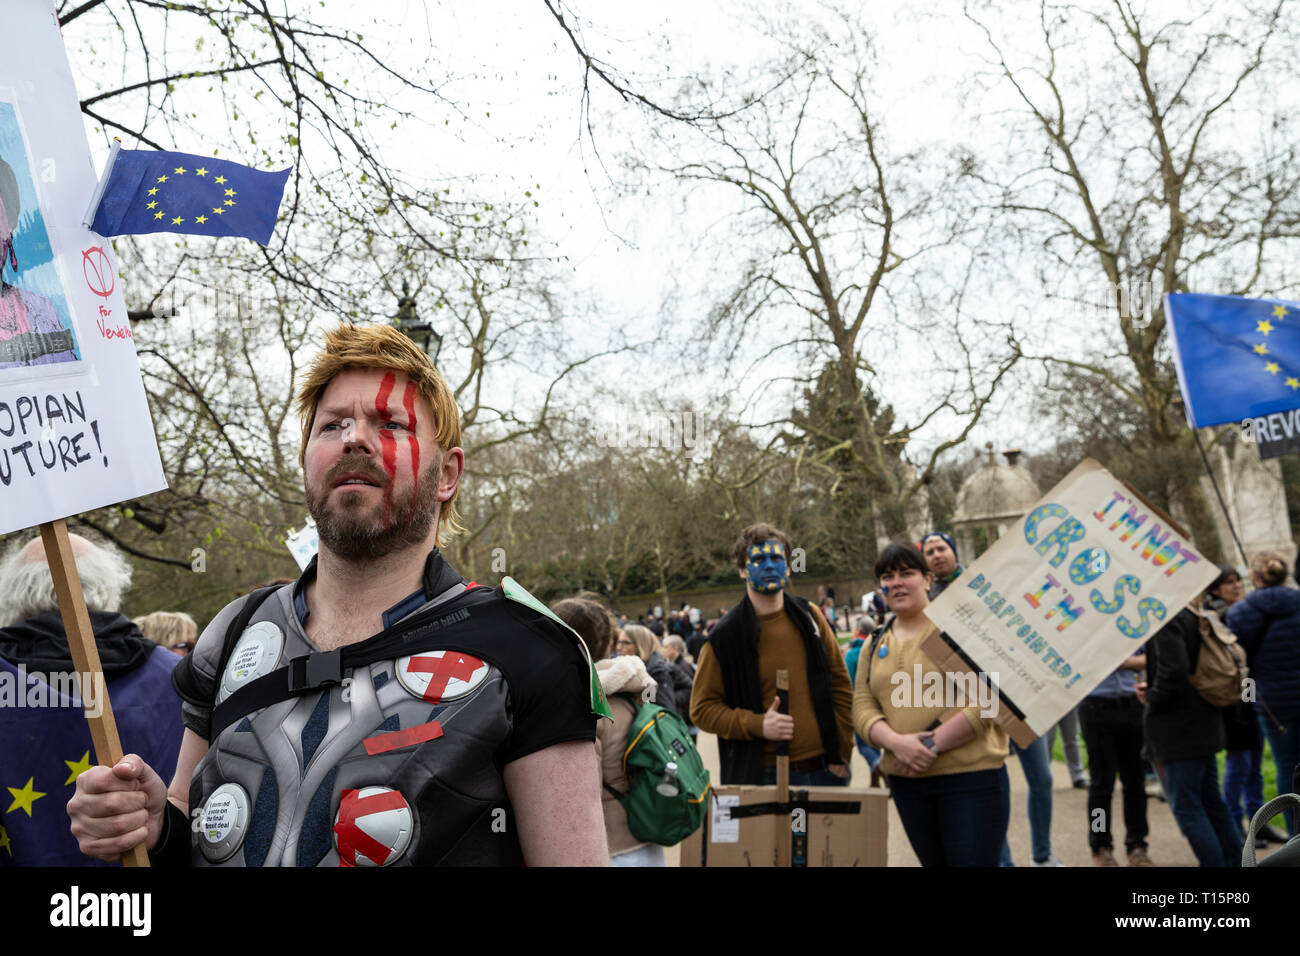 London, UK. 23rd Mar, 2019. Hundreds of thousands of people have joined Brexit march protest to demand new referendum in Central London, UK Credit: tottotophotography/Alamy Live News Stock Photo